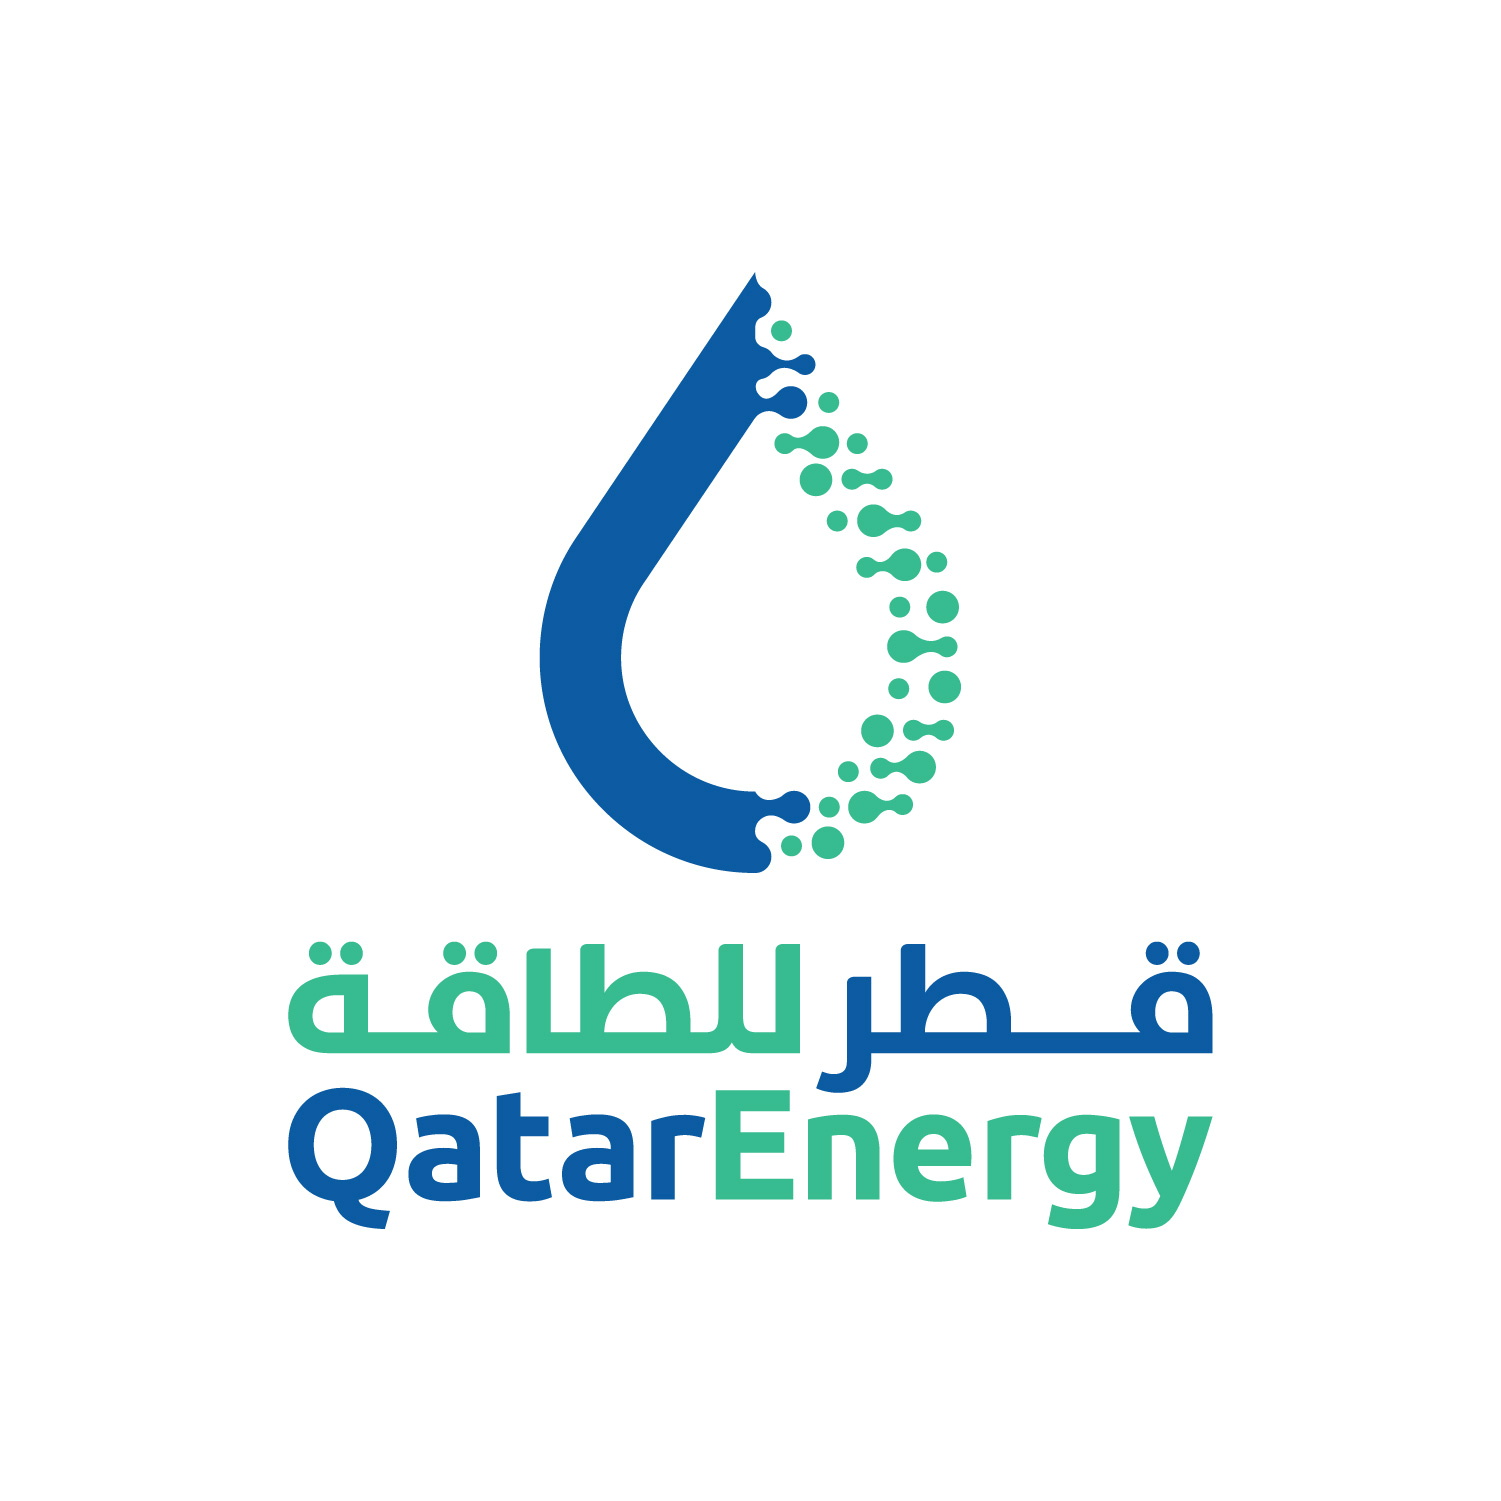 The new Qatar Energy logo is pictured during a news conference in Doha